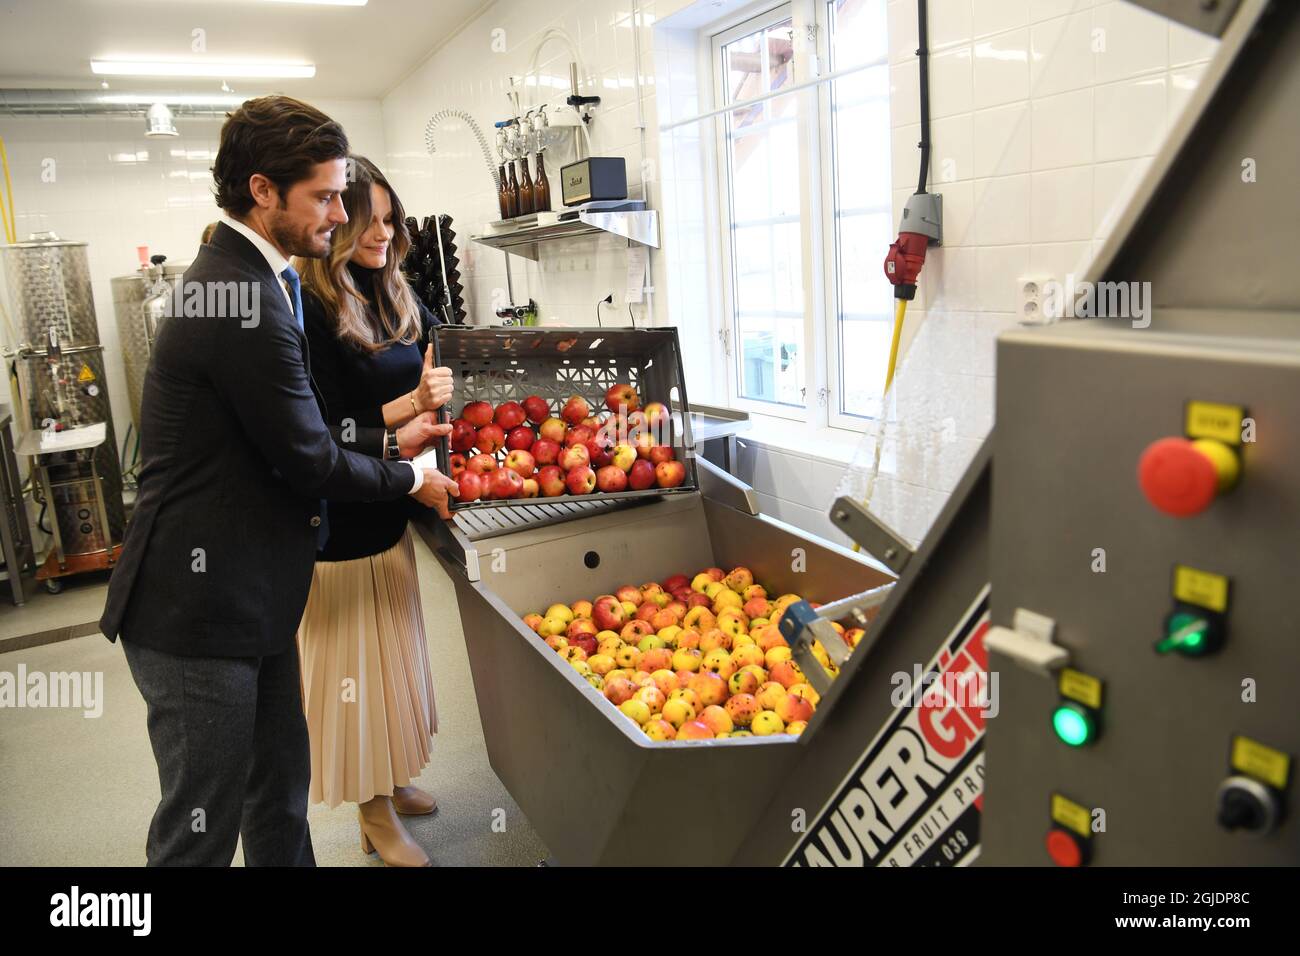 Prince Carl Philip and Princess Sofia make apple juice during the visit to Kulinarika at Aplungen, a restaurant and vineyard south of Sunne, Sweden, on October 28, 2020. The Prince Couple are spending the day in Varmland County to see how it has been affected by Covid-19. Photo: Fredrik Sandberg / TT / code 10080 Stock Photo